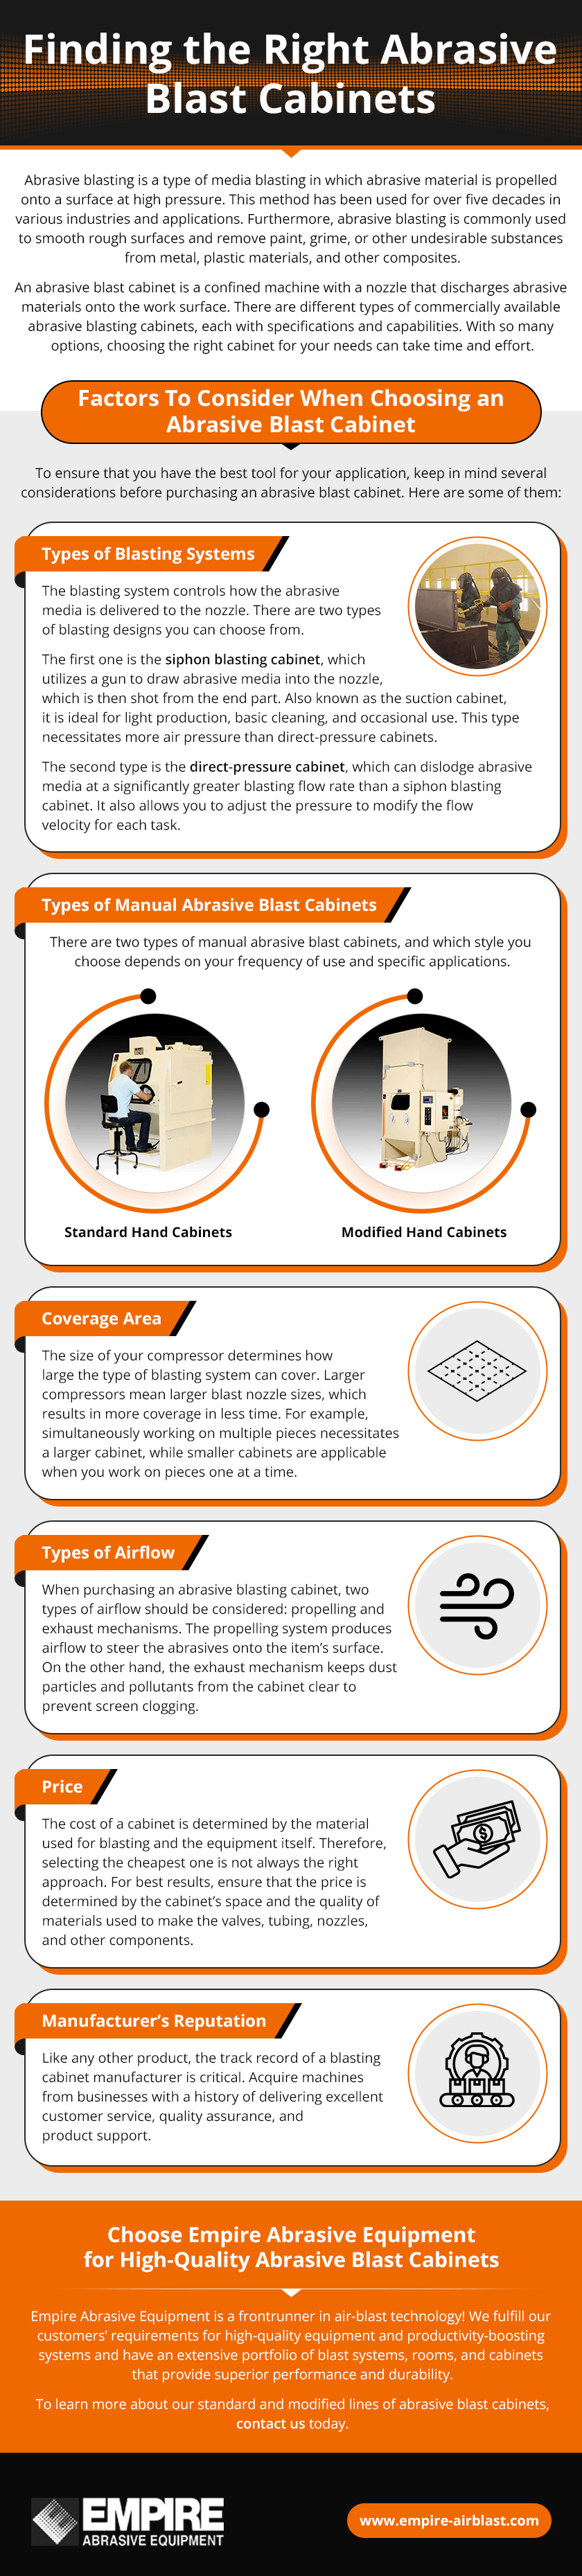 Finding the Right Abrasive Blast Cabinets Infographic